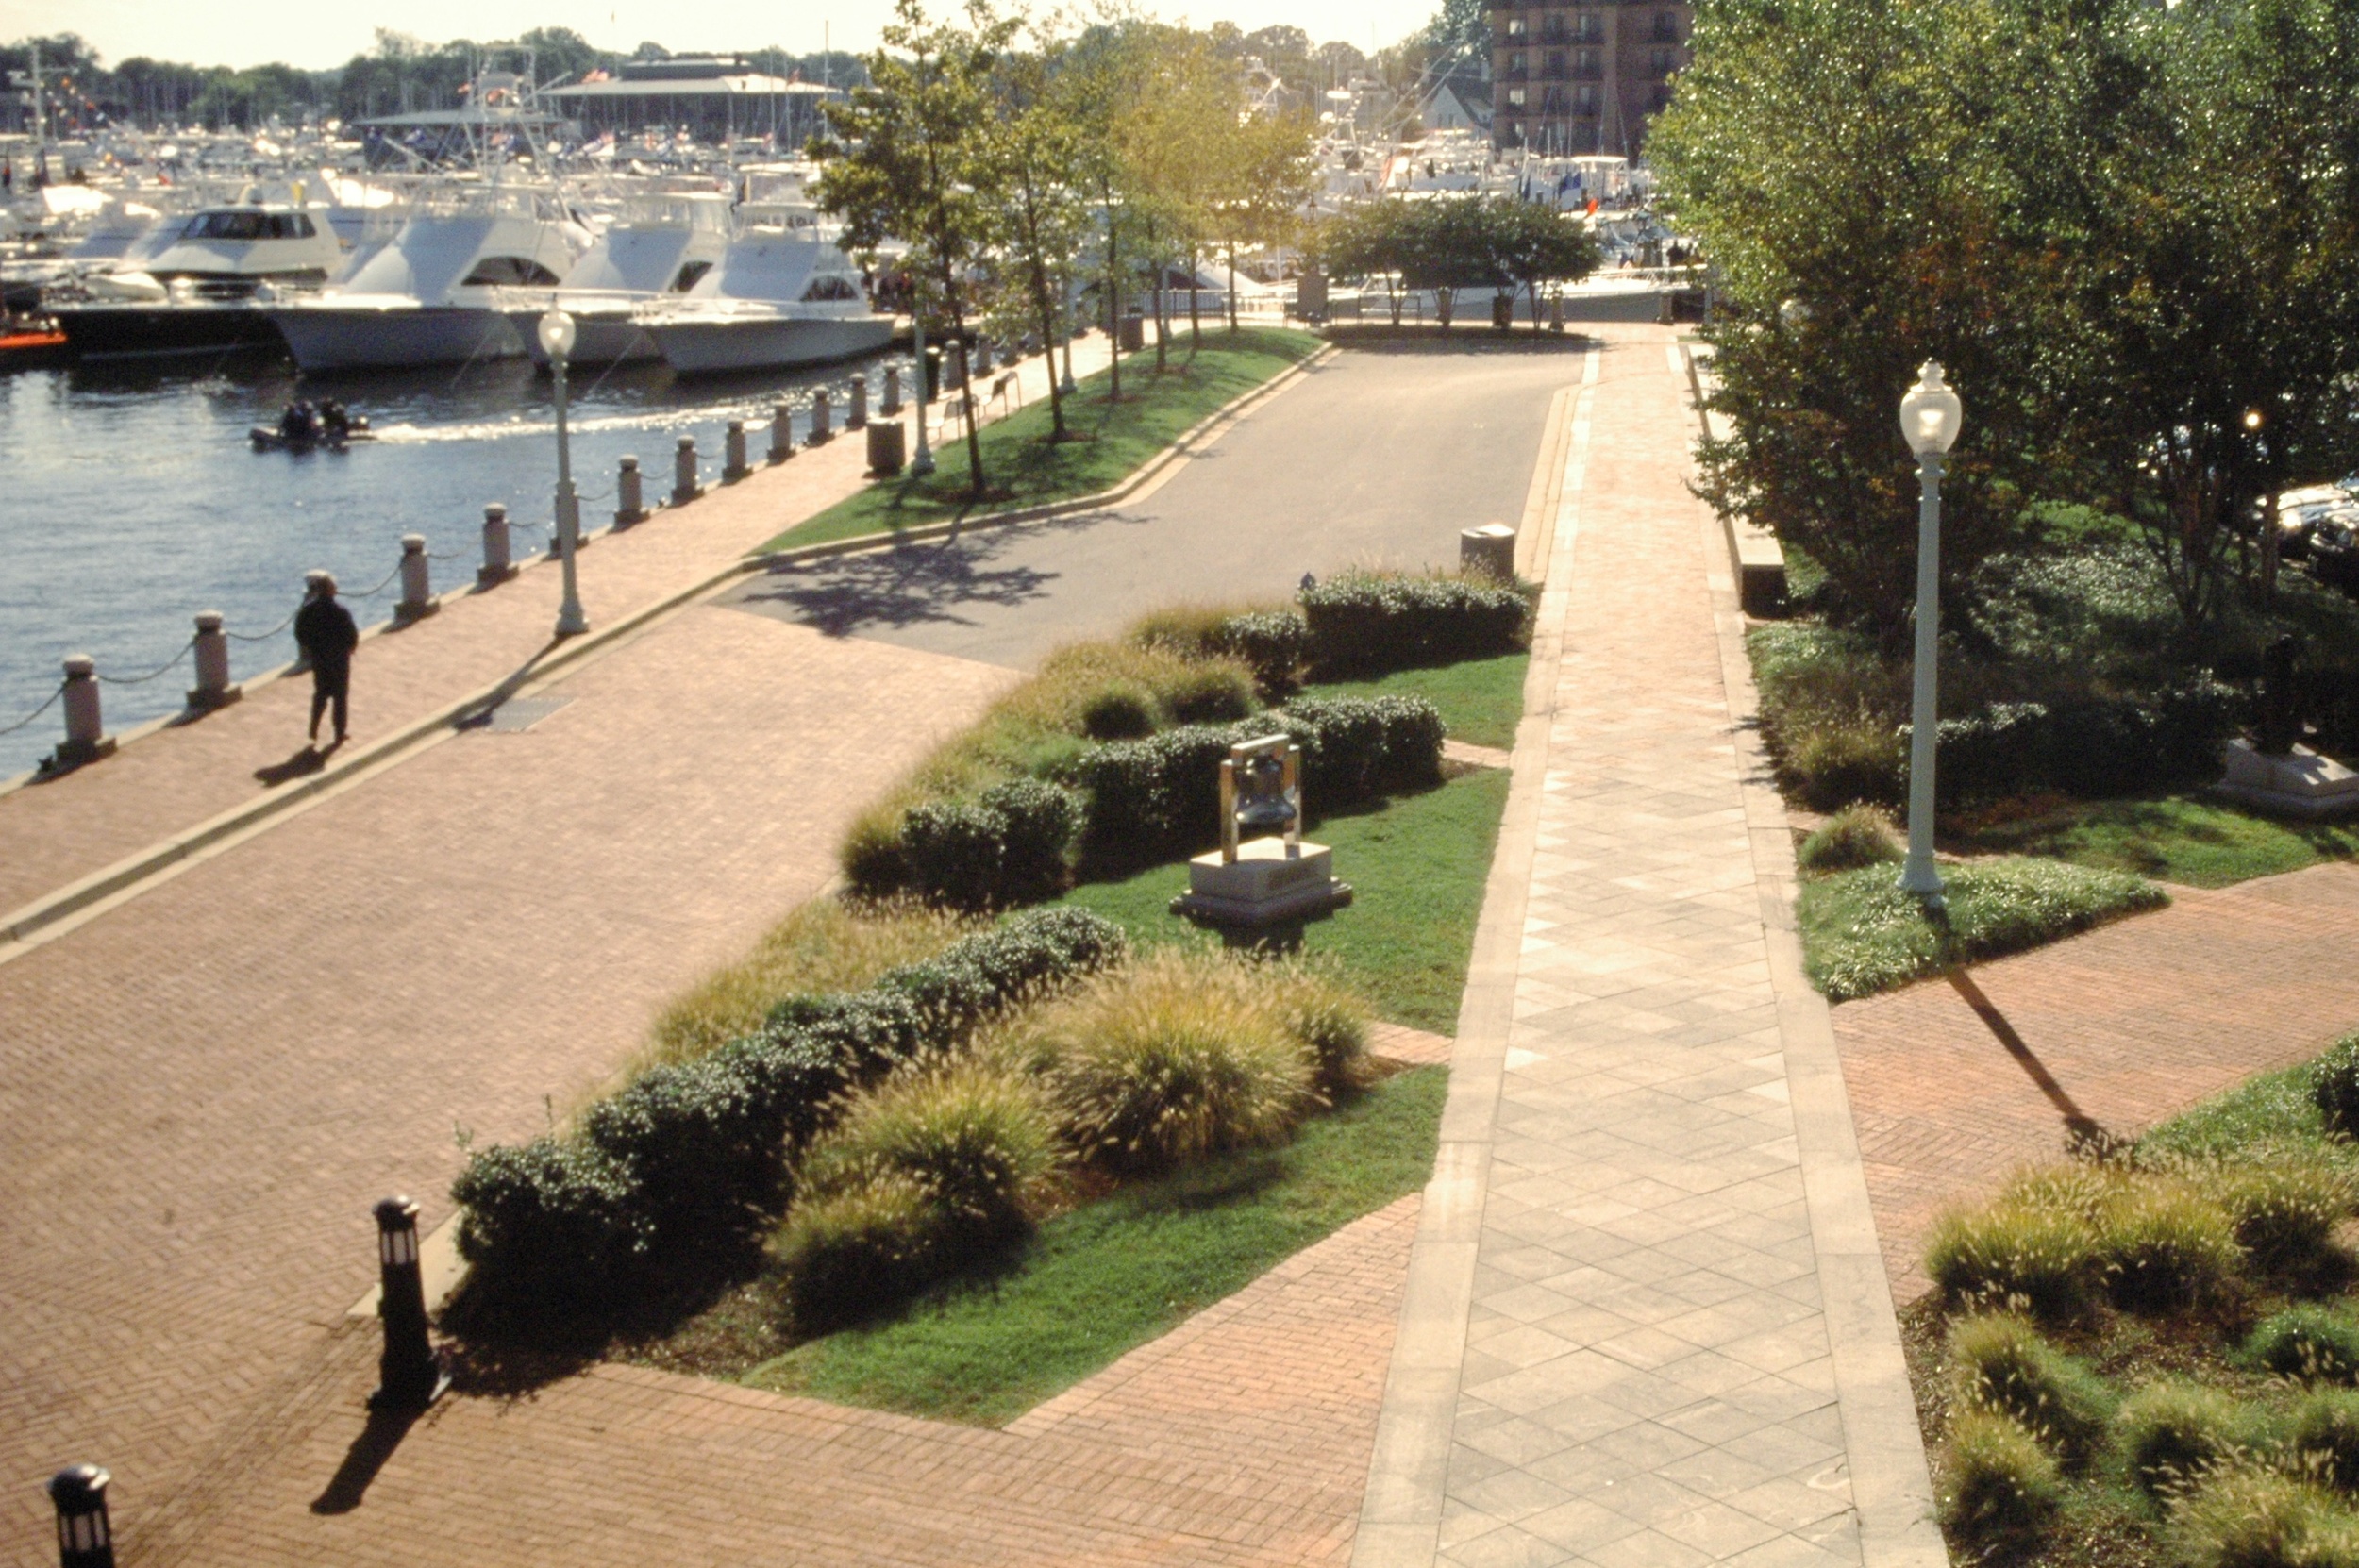   Project Location: &nbsp;&nbsp;Annapolis, MD  Completion: &nbsp;&nbsp;1985  Project Architect: &nbsp;CSD Architects  Primary Material Palette: &nbsp;granite, brick  Awards: &nbsp;Merit Award, American Society of Landscape Architects Maryland Chapter